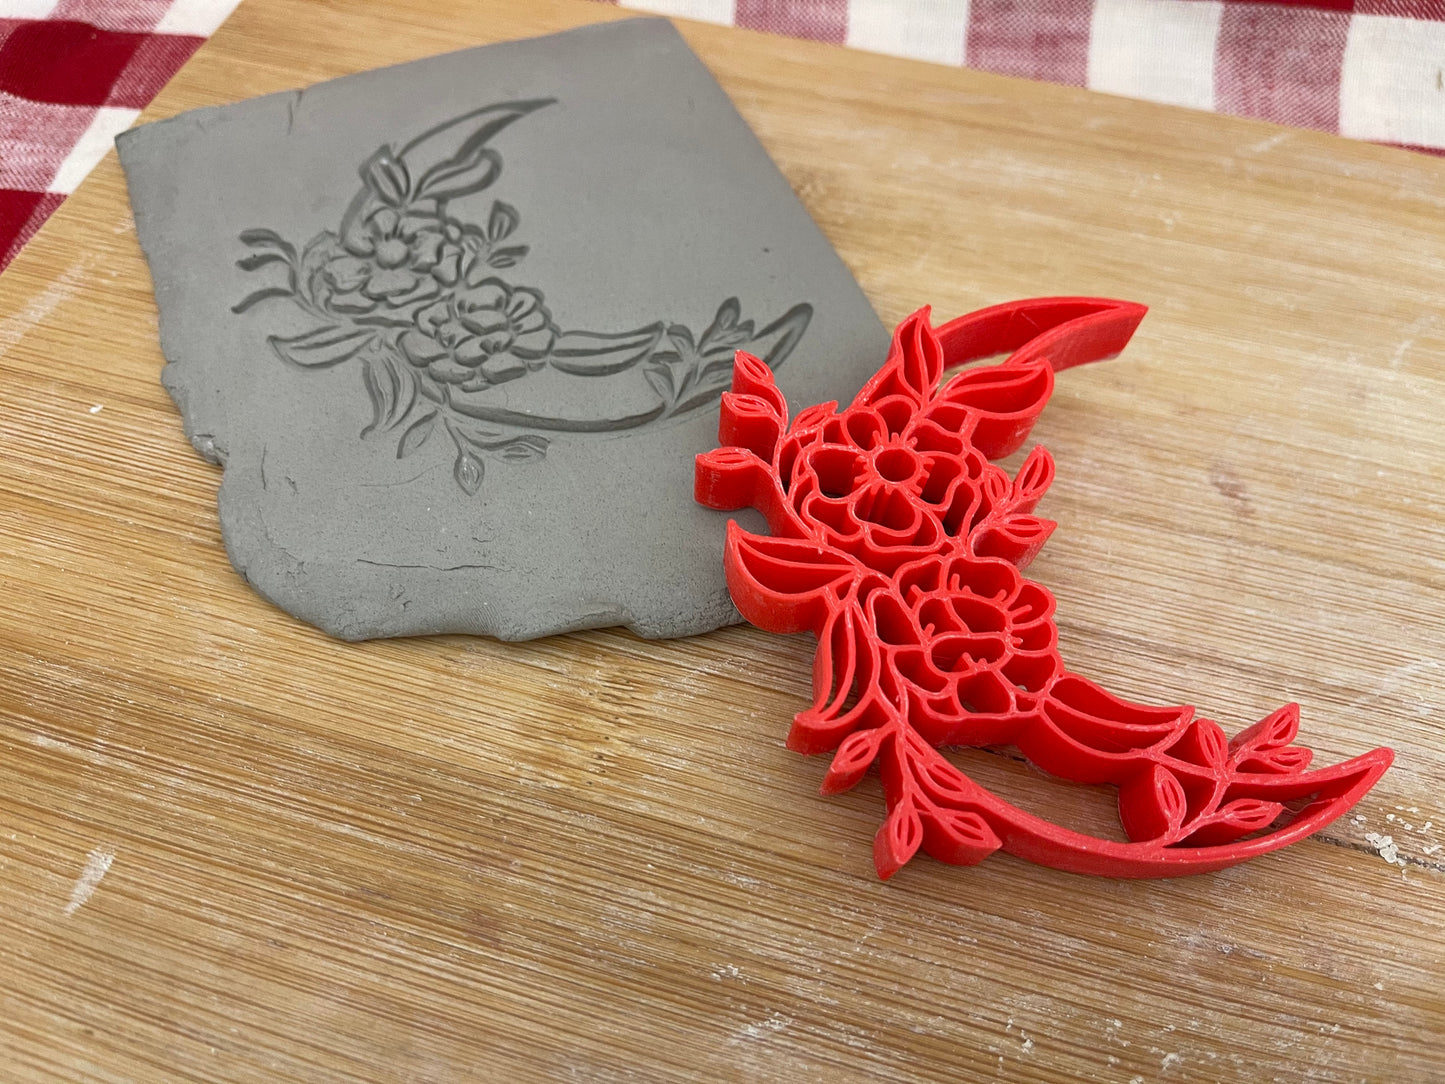 Floral Moon stamp - plastic 3D printed, multiple sizes